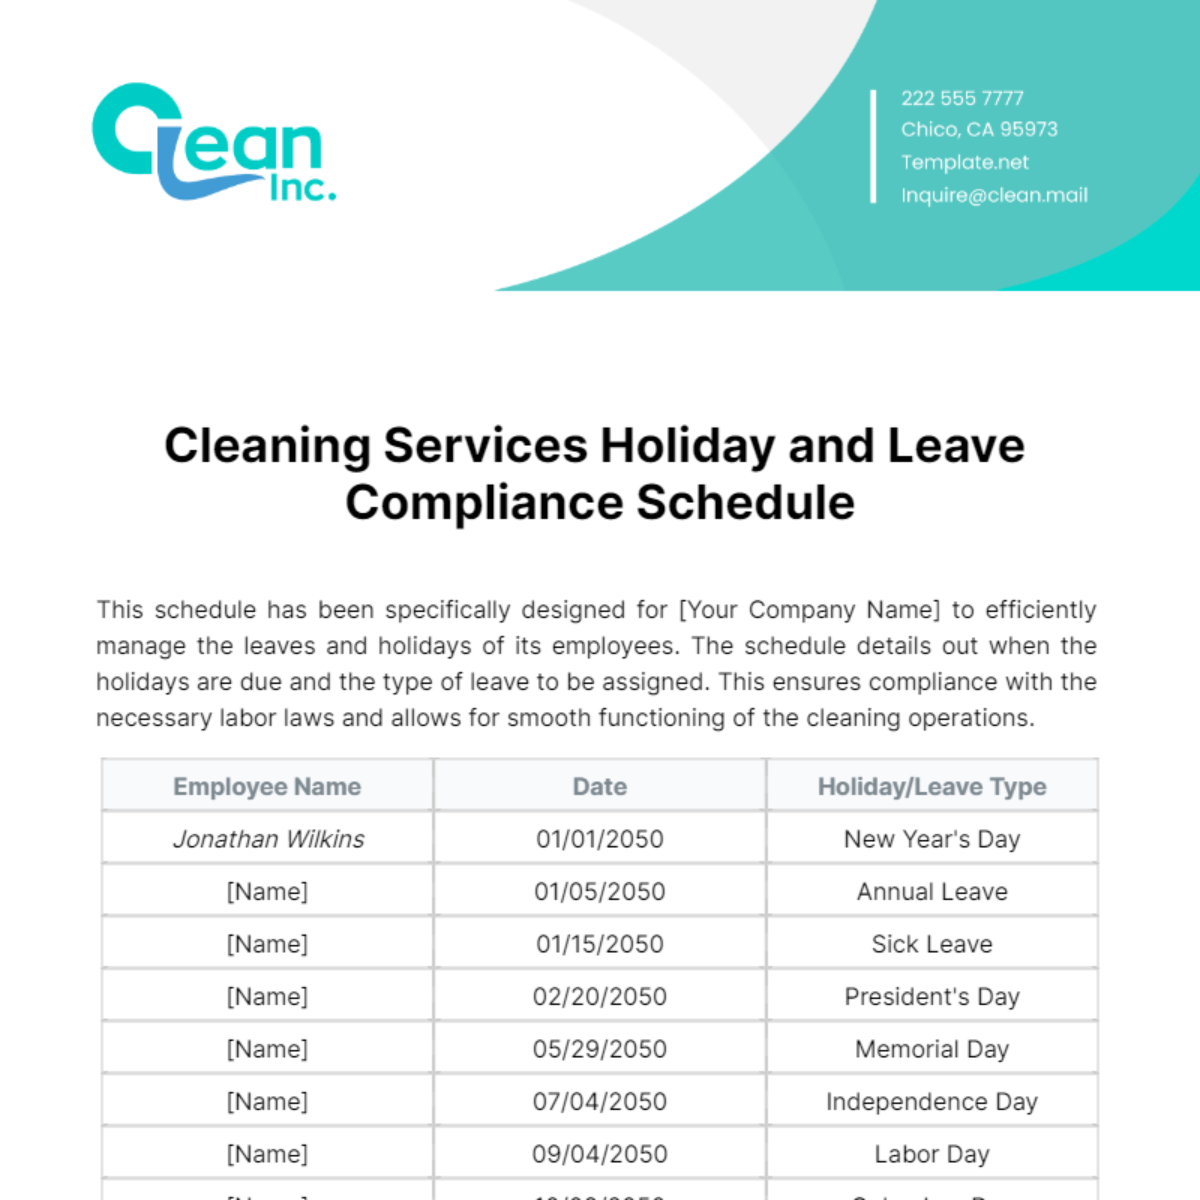 Free Cleaning Services Holiday and Leave Compliance Schedule Template